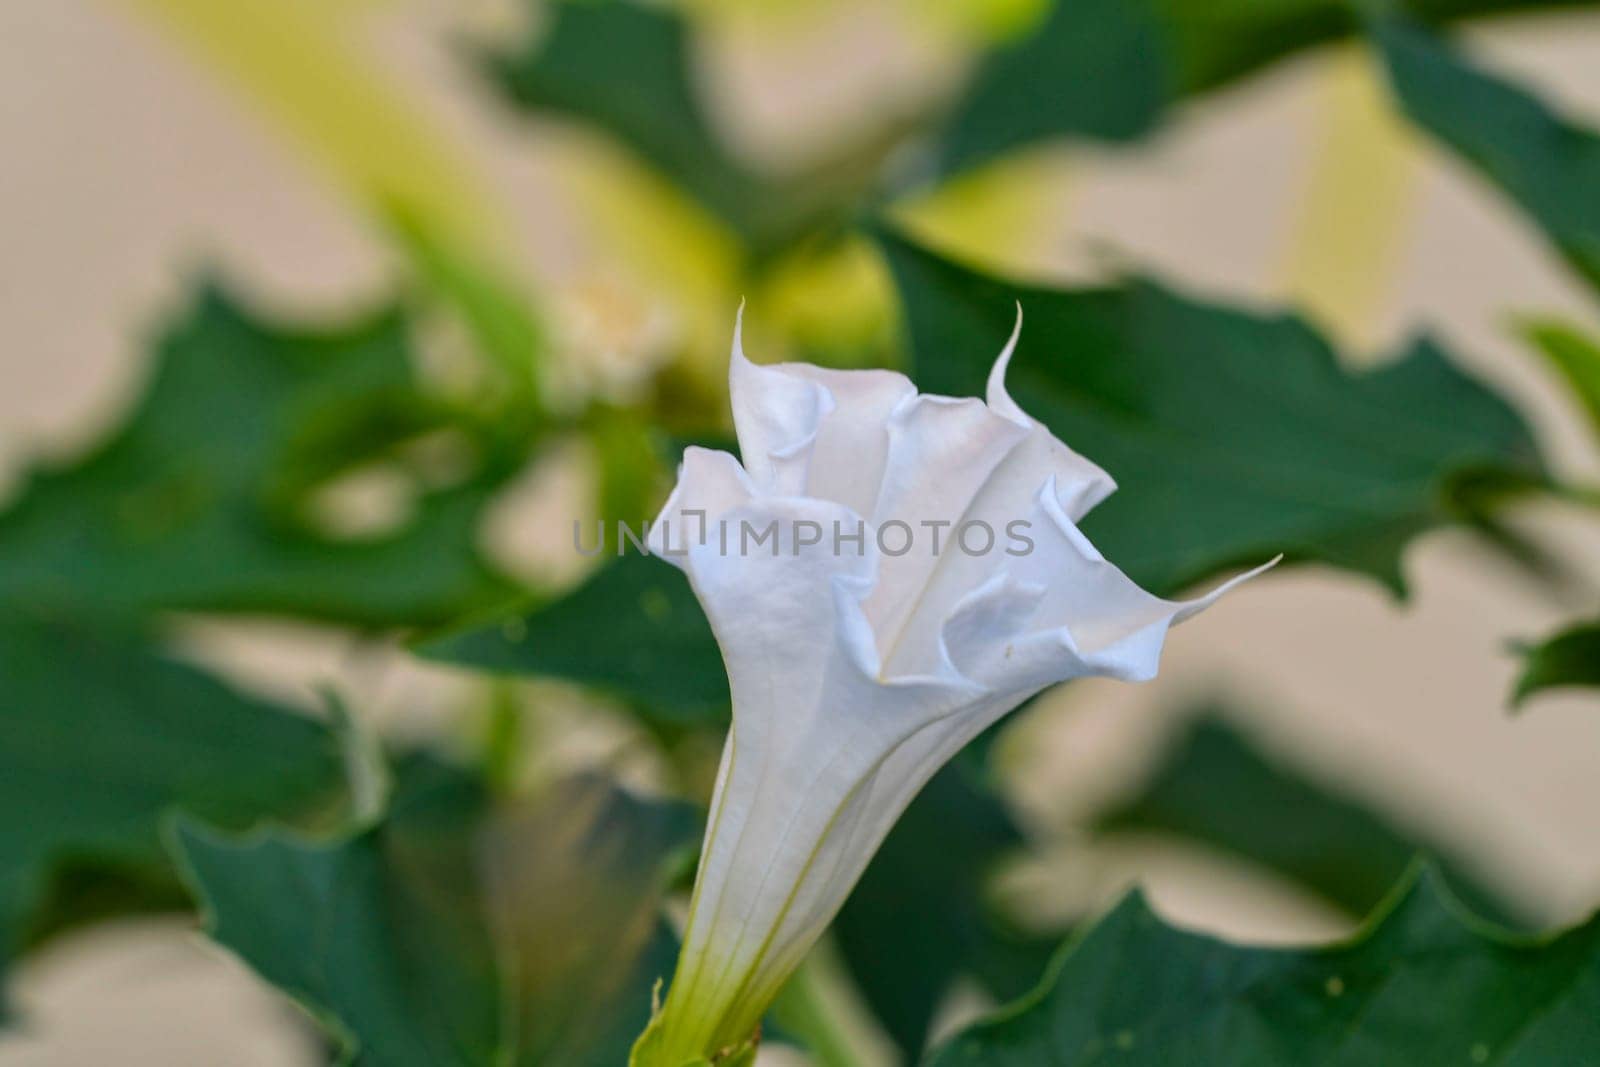 Datura stramonium, known by the common names thorn apple, jimsonweed (jimson weed), devil's snare, or devil's trumpet, is a poisonous flowering plant of the nightshade family Solanaceae. It is a species belonging to the Datura genus and Daturae tribe. Its likely origin was in Central America, and it has been introduced in many world regions. It is an aggressive invasive weed in temperate climates and tropical climates across the world.